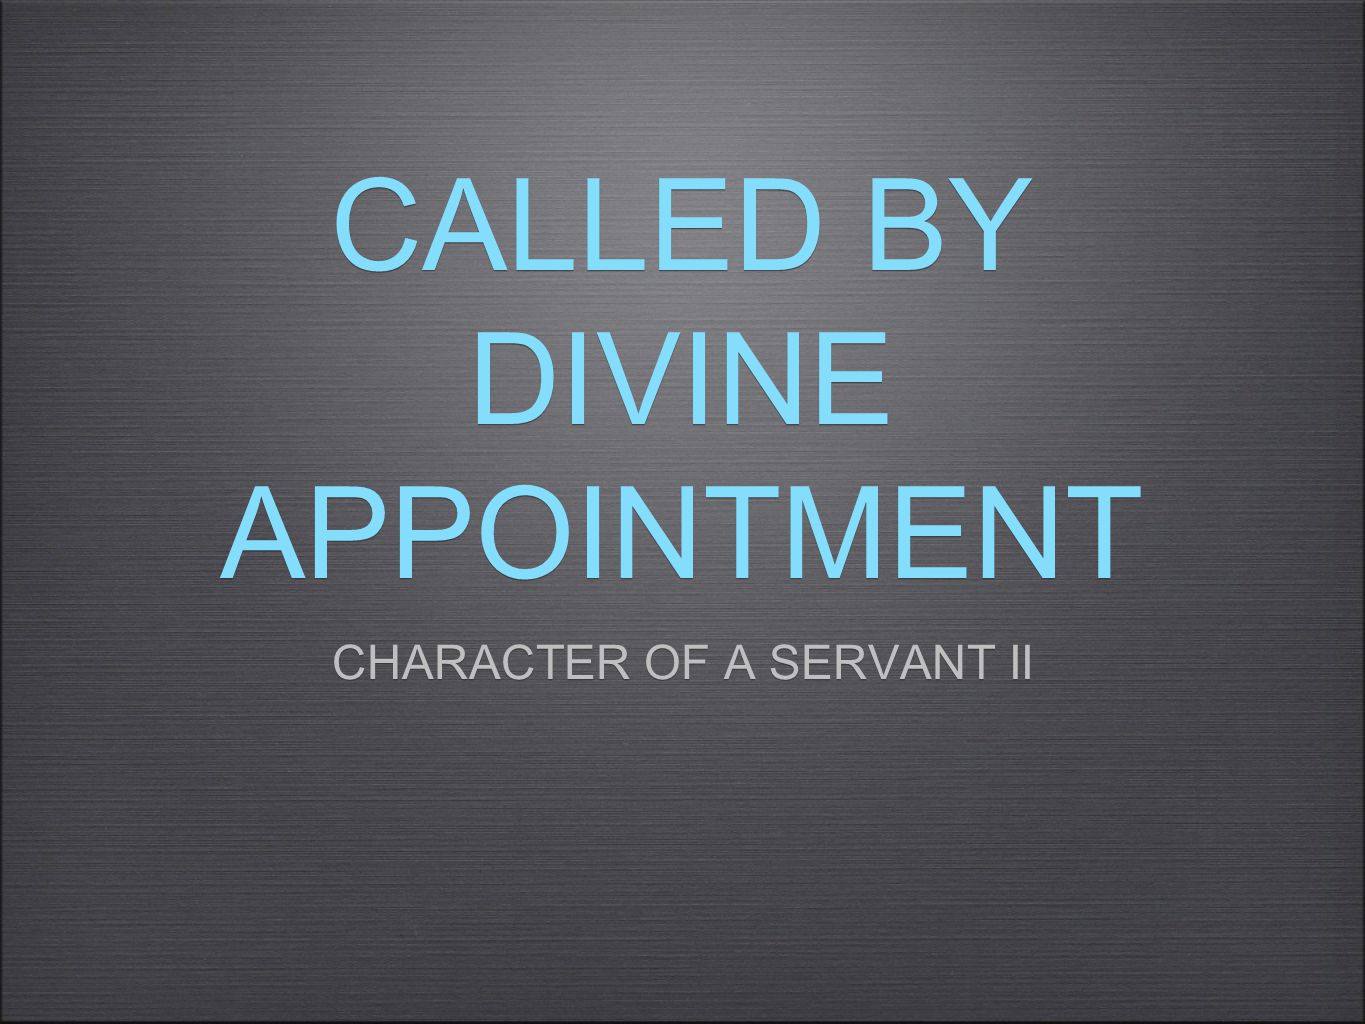 CALLED BY DIVINE APPOINTMENT CHARACTER OF A SERVANT II CHARACTER OF A SERVANT II